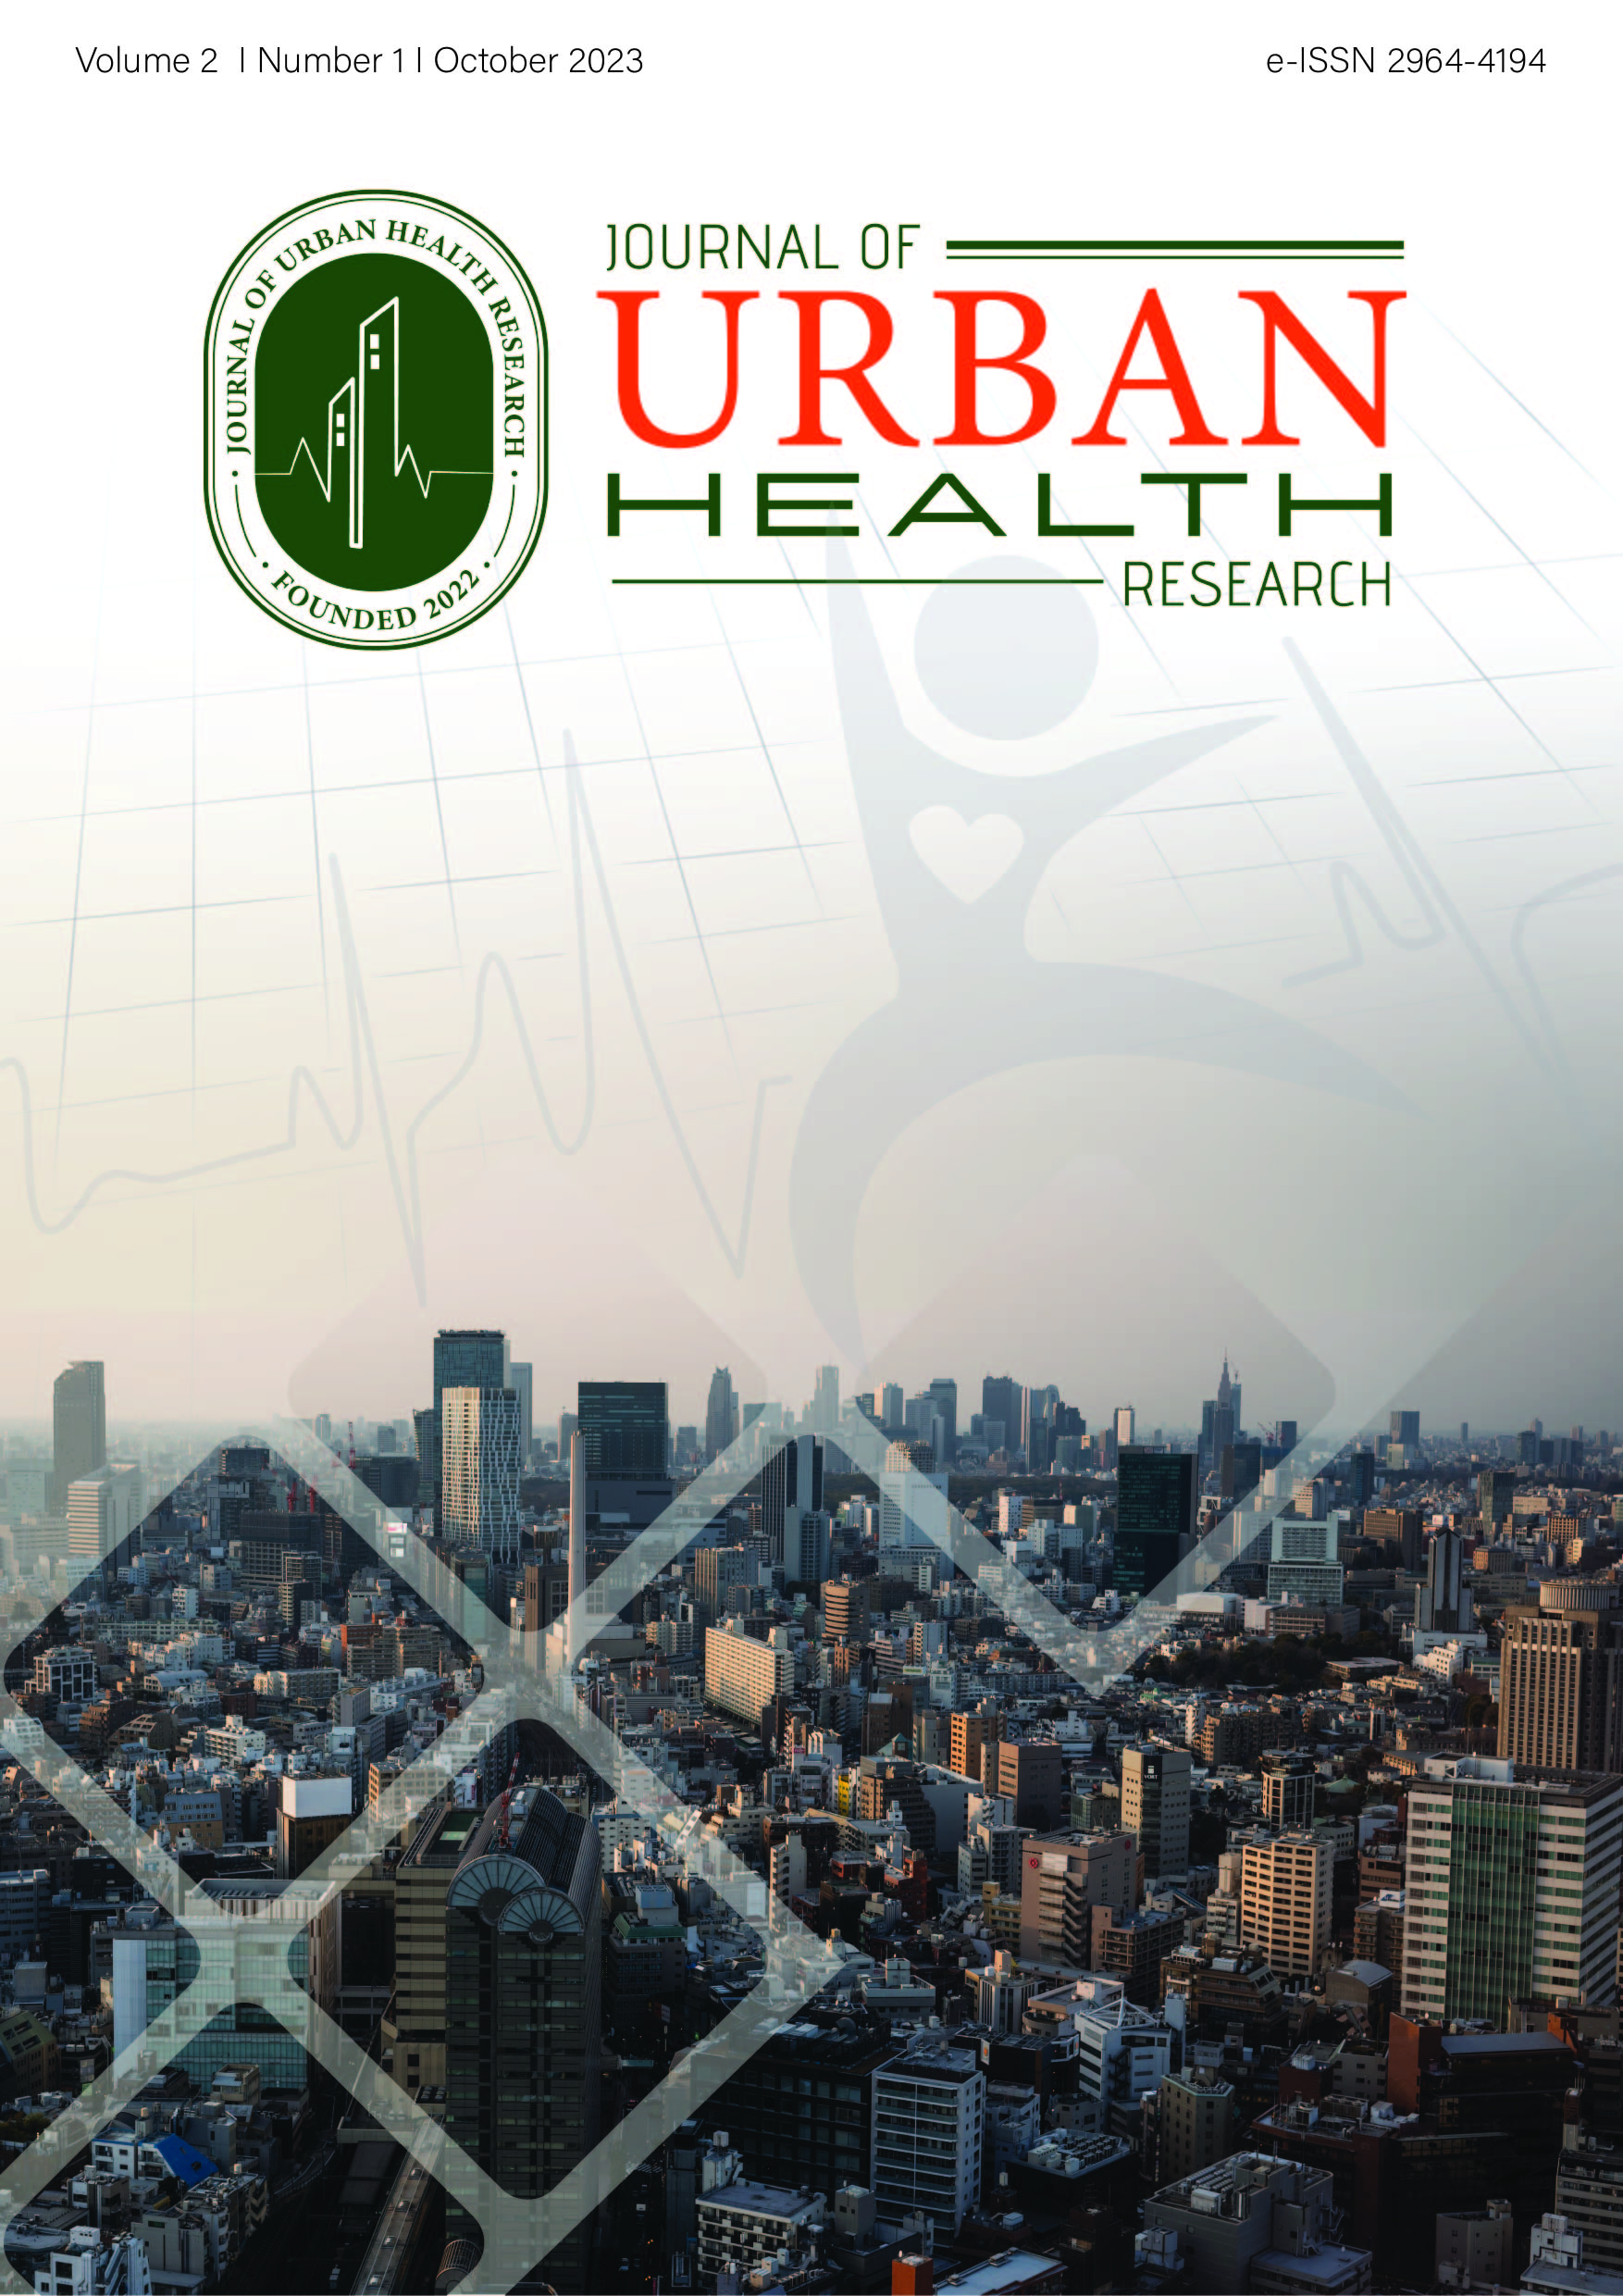 					View Vol. 2 No. 1 (2023): Journal of Urban Health Research
				